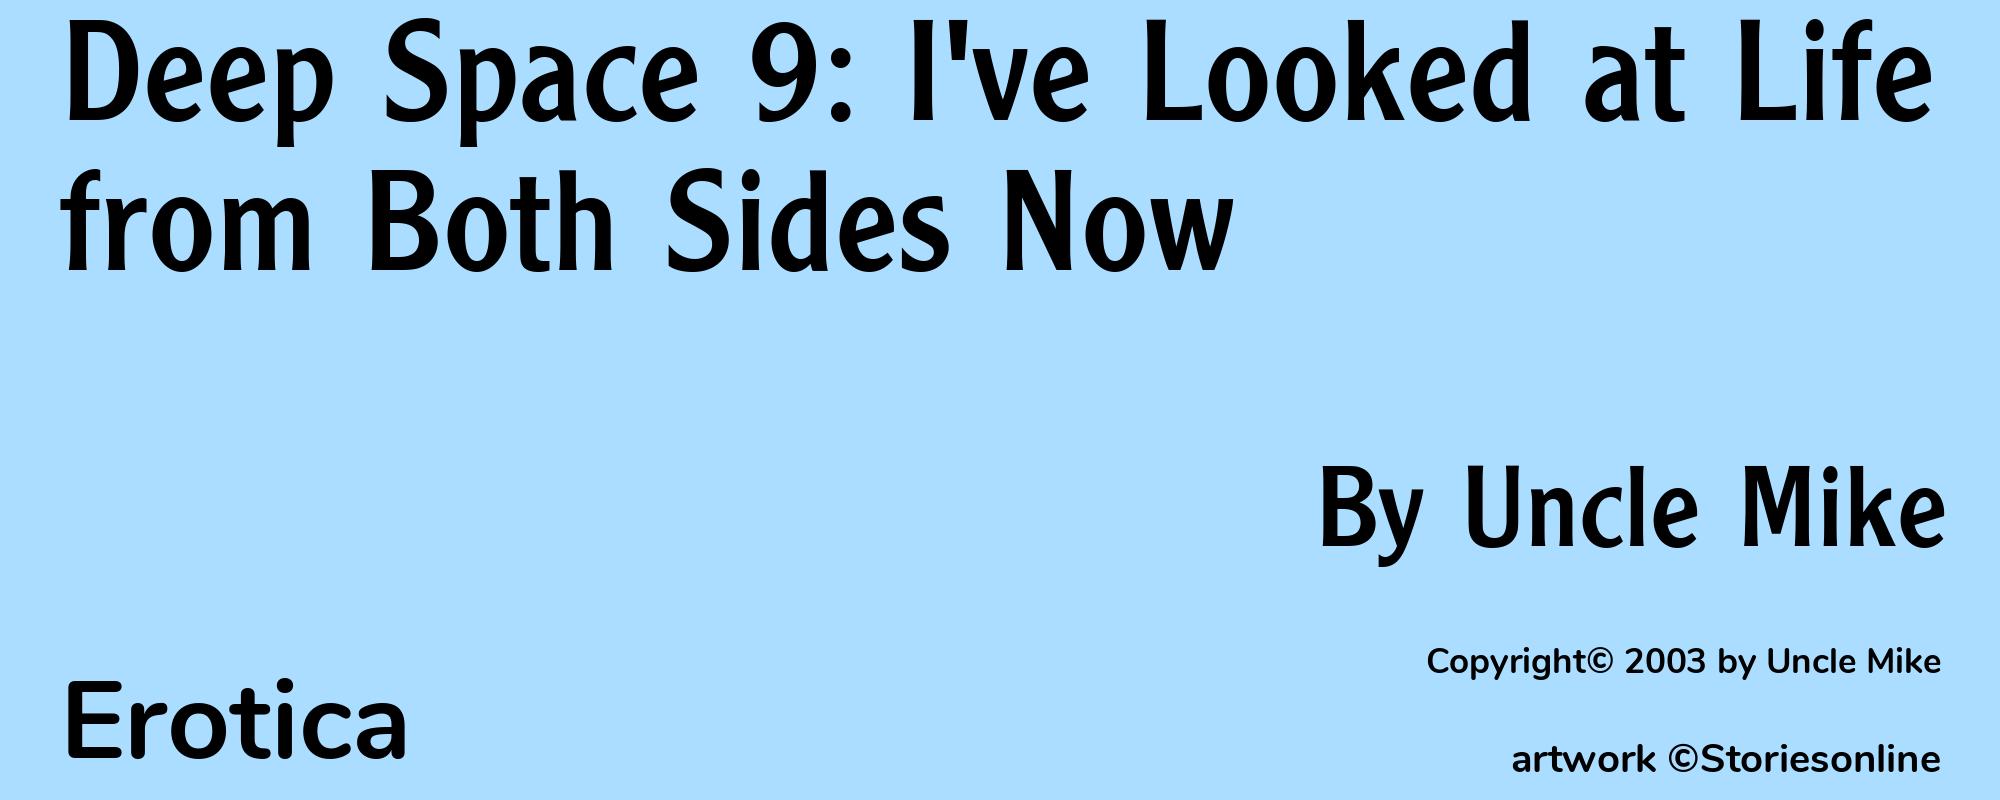 Deep Space 9: I've Looked at Life from Both Sides Now - Cover